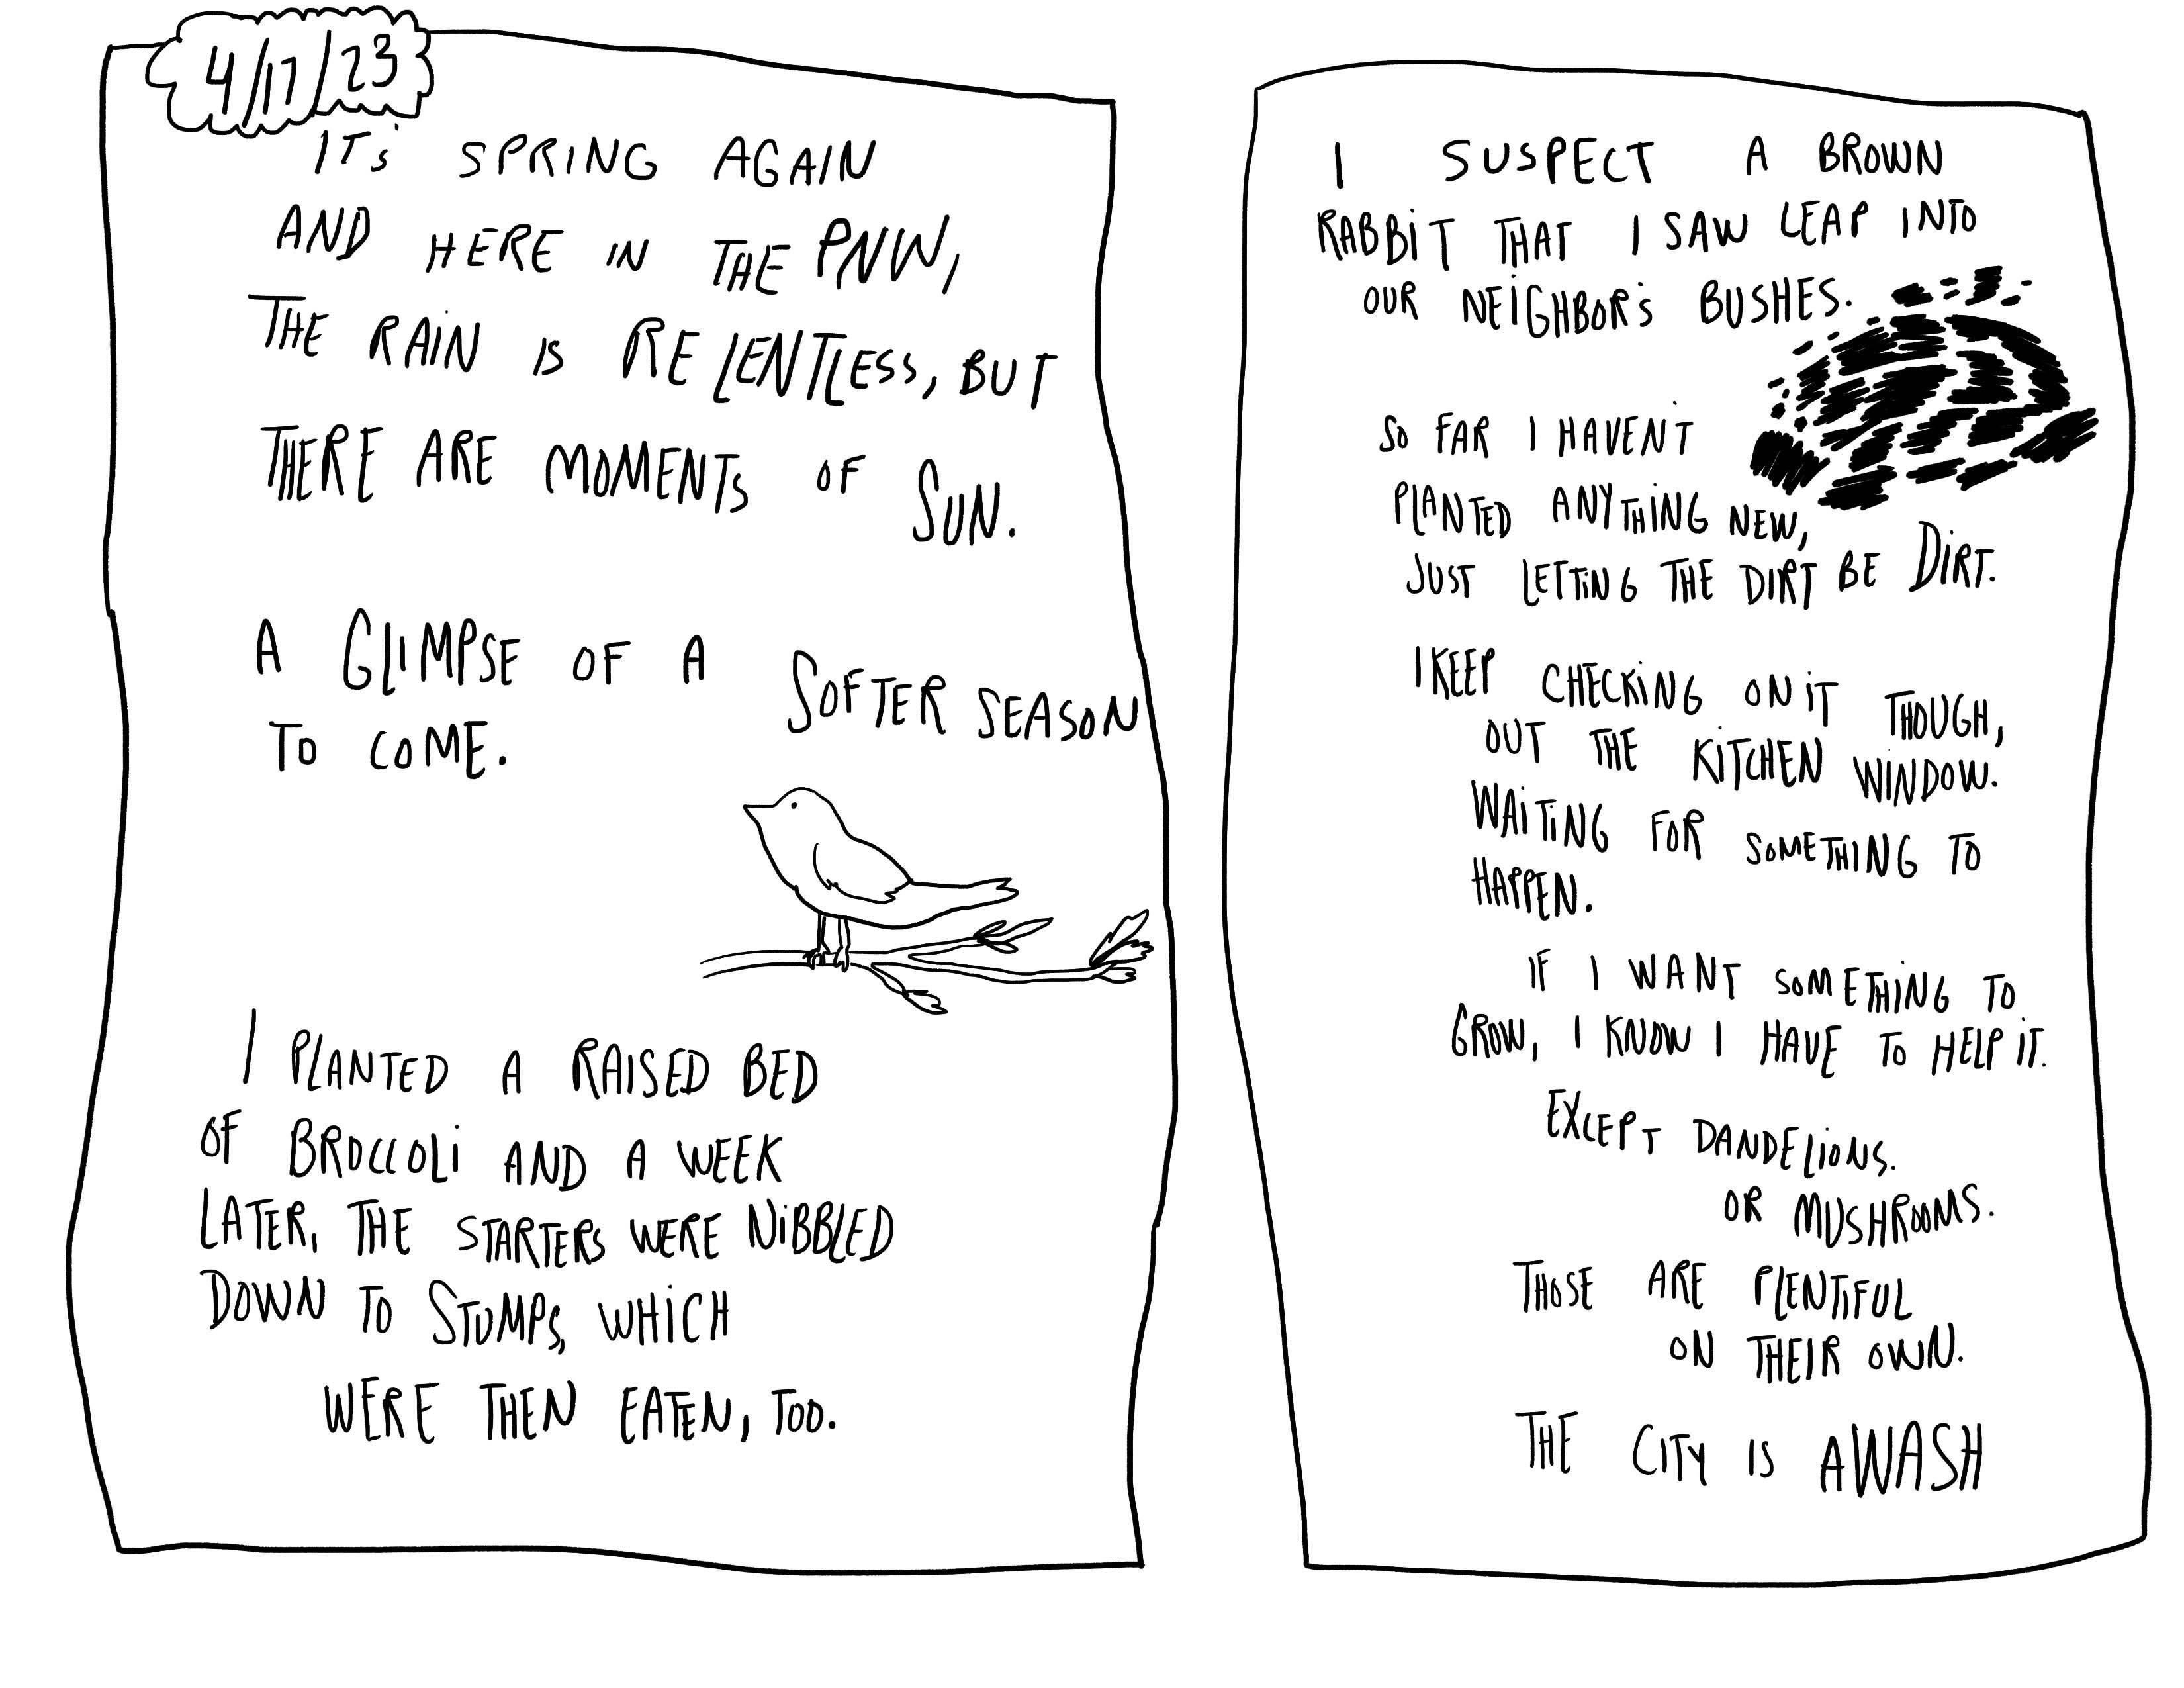 a comic featuring a drawing of a bird and the following text: It's spring again and here in the PNW, the rain is relentless, but there are moments of sun. A glimpse of a softer season to come. I planted a raised bed of broccoli and a week later, the starters were nibbled down to stumps, which were then eaten too. I suspect a brown rabbit that I saw leap into our neighbor's bushes. So far I haven't planted anything new, just letting the dirt be dirt. I keep checking on it though, out the kitchen window. Waiting for something to happen. If I want something to grow, I know I have to help it. Except dandelions. Or mushrooms. Those are plentiful on their own. The city is awash